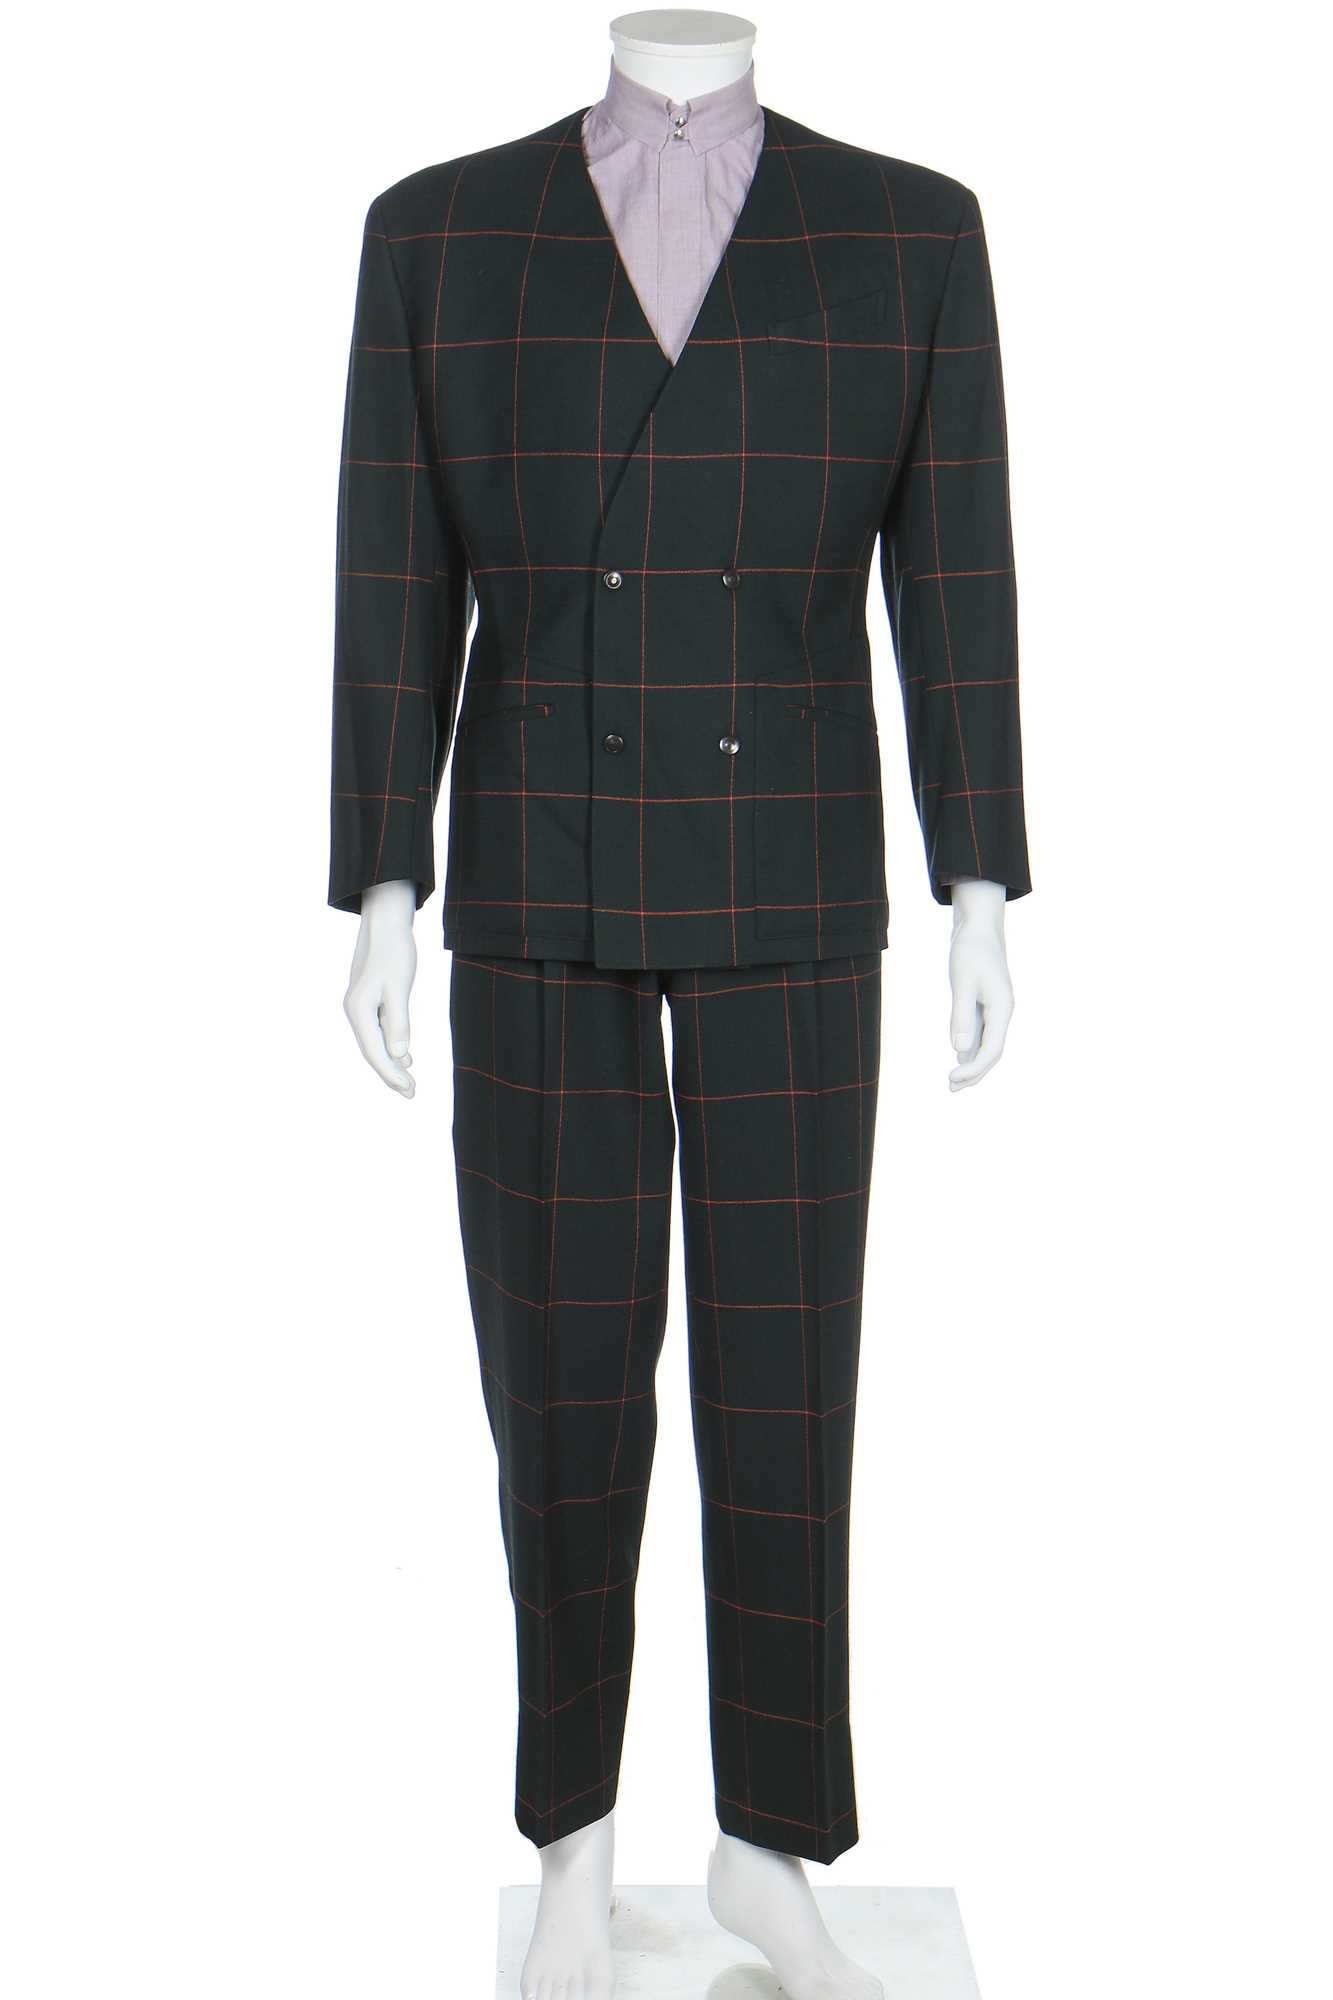 Lot 190 - A Thierry Mugler men's windowpane-checked wool suit, 1980s-early 1990s